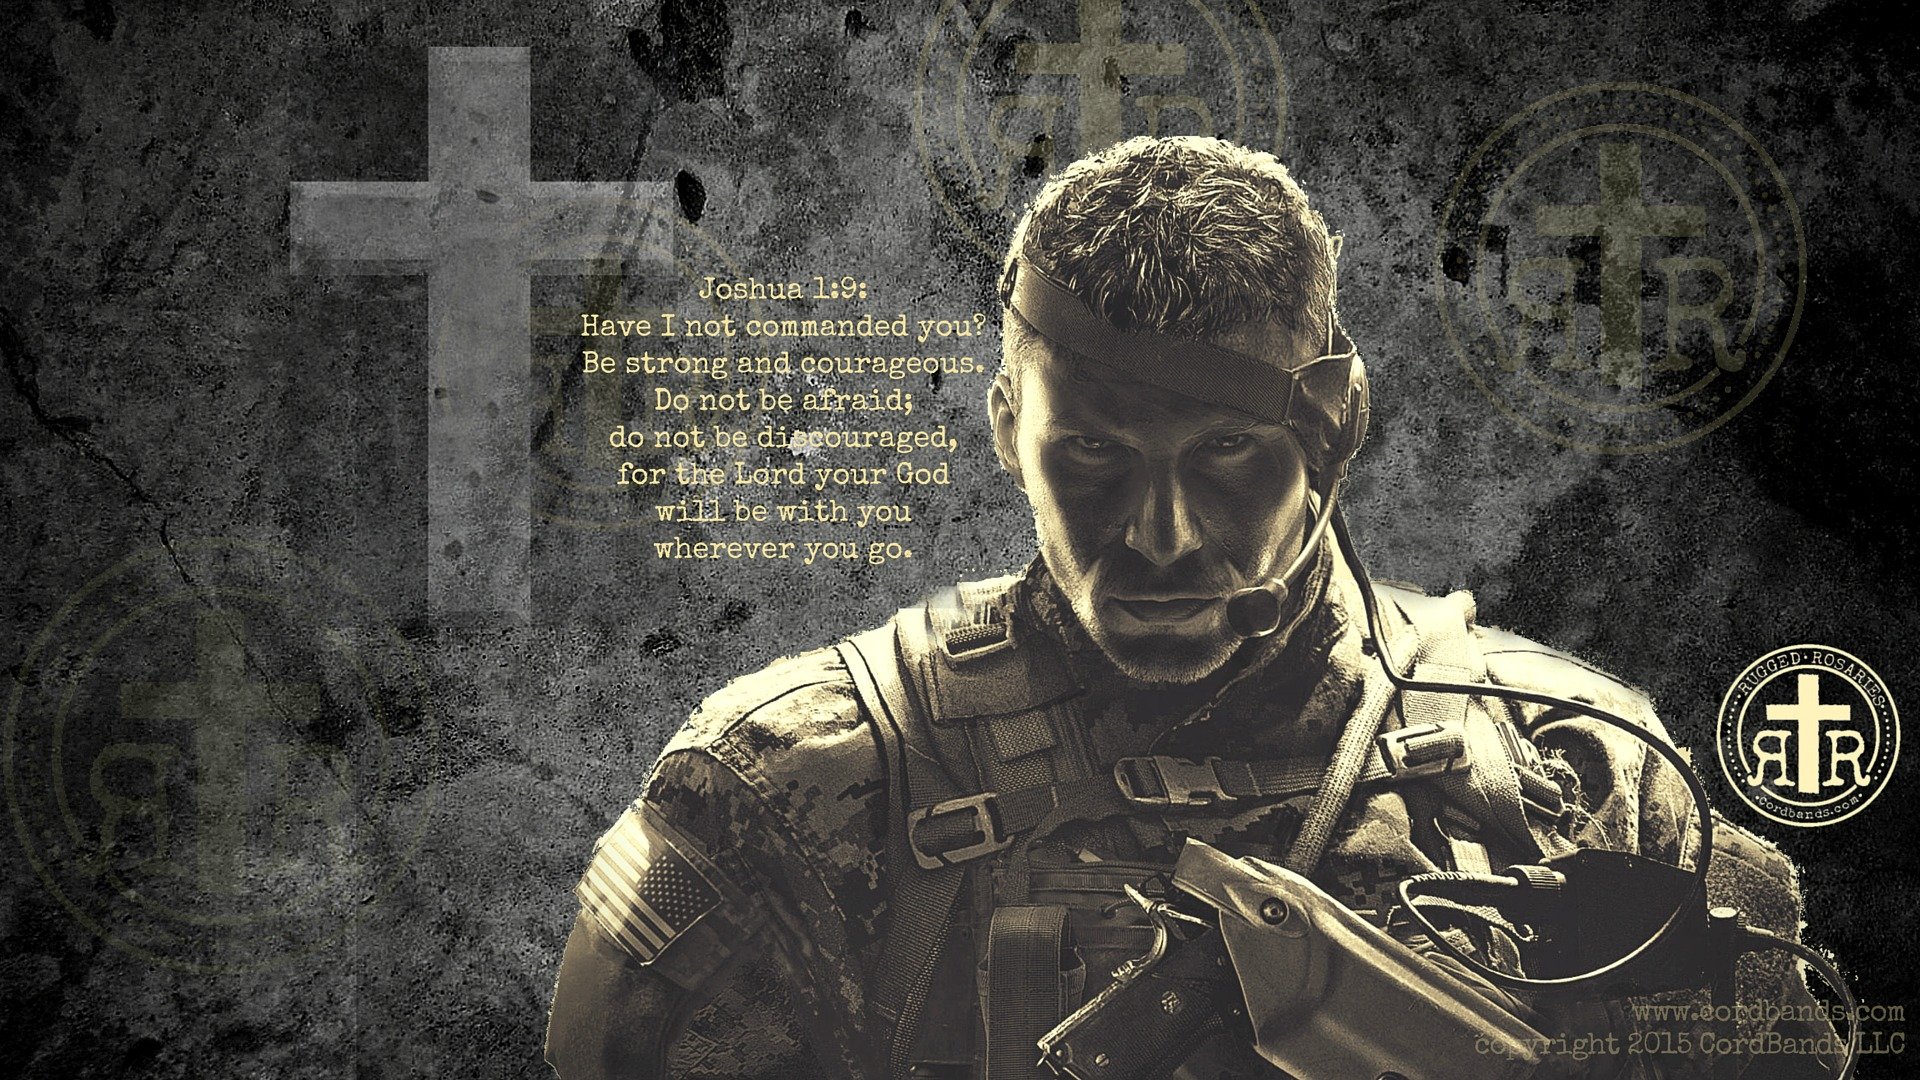 Wallpaper From Rugged Rosaries